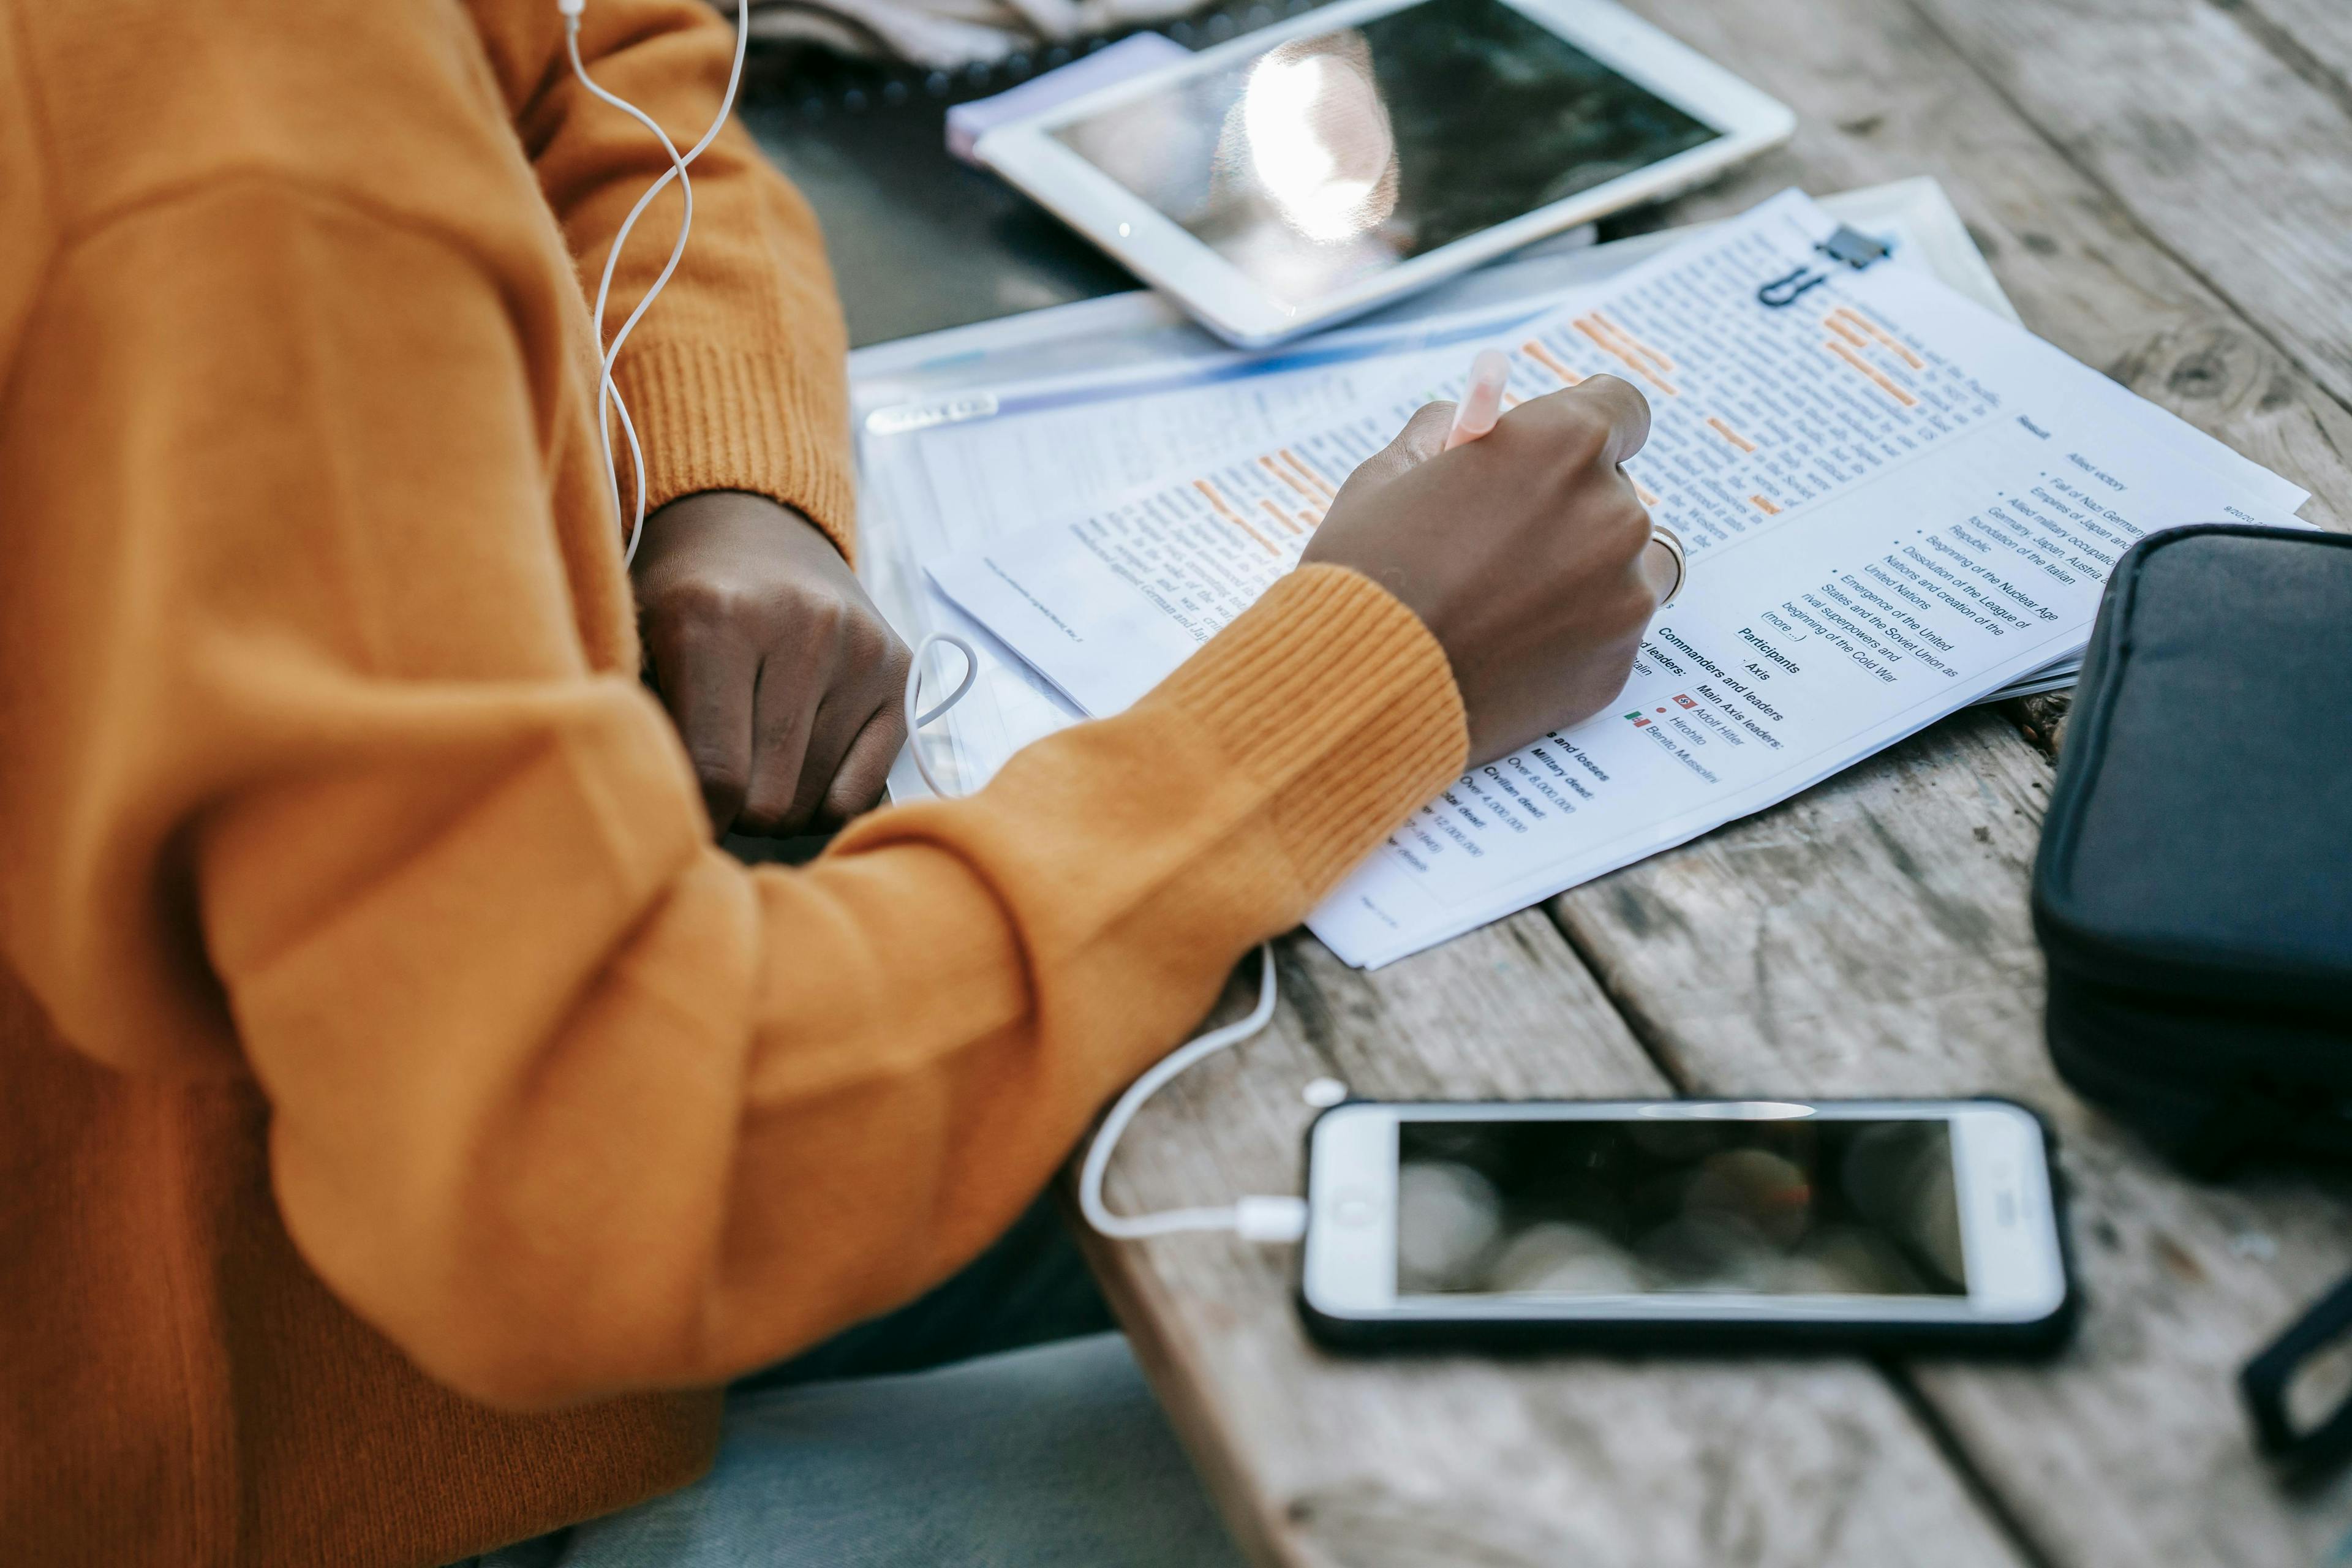 a person wearing an orange sweater, highlighting a text document with a marker, and listening to earphones. On the table are a tablet and a smartphone. This setting is perfect for exploring "lead generation services" to enhance business research and productivity.